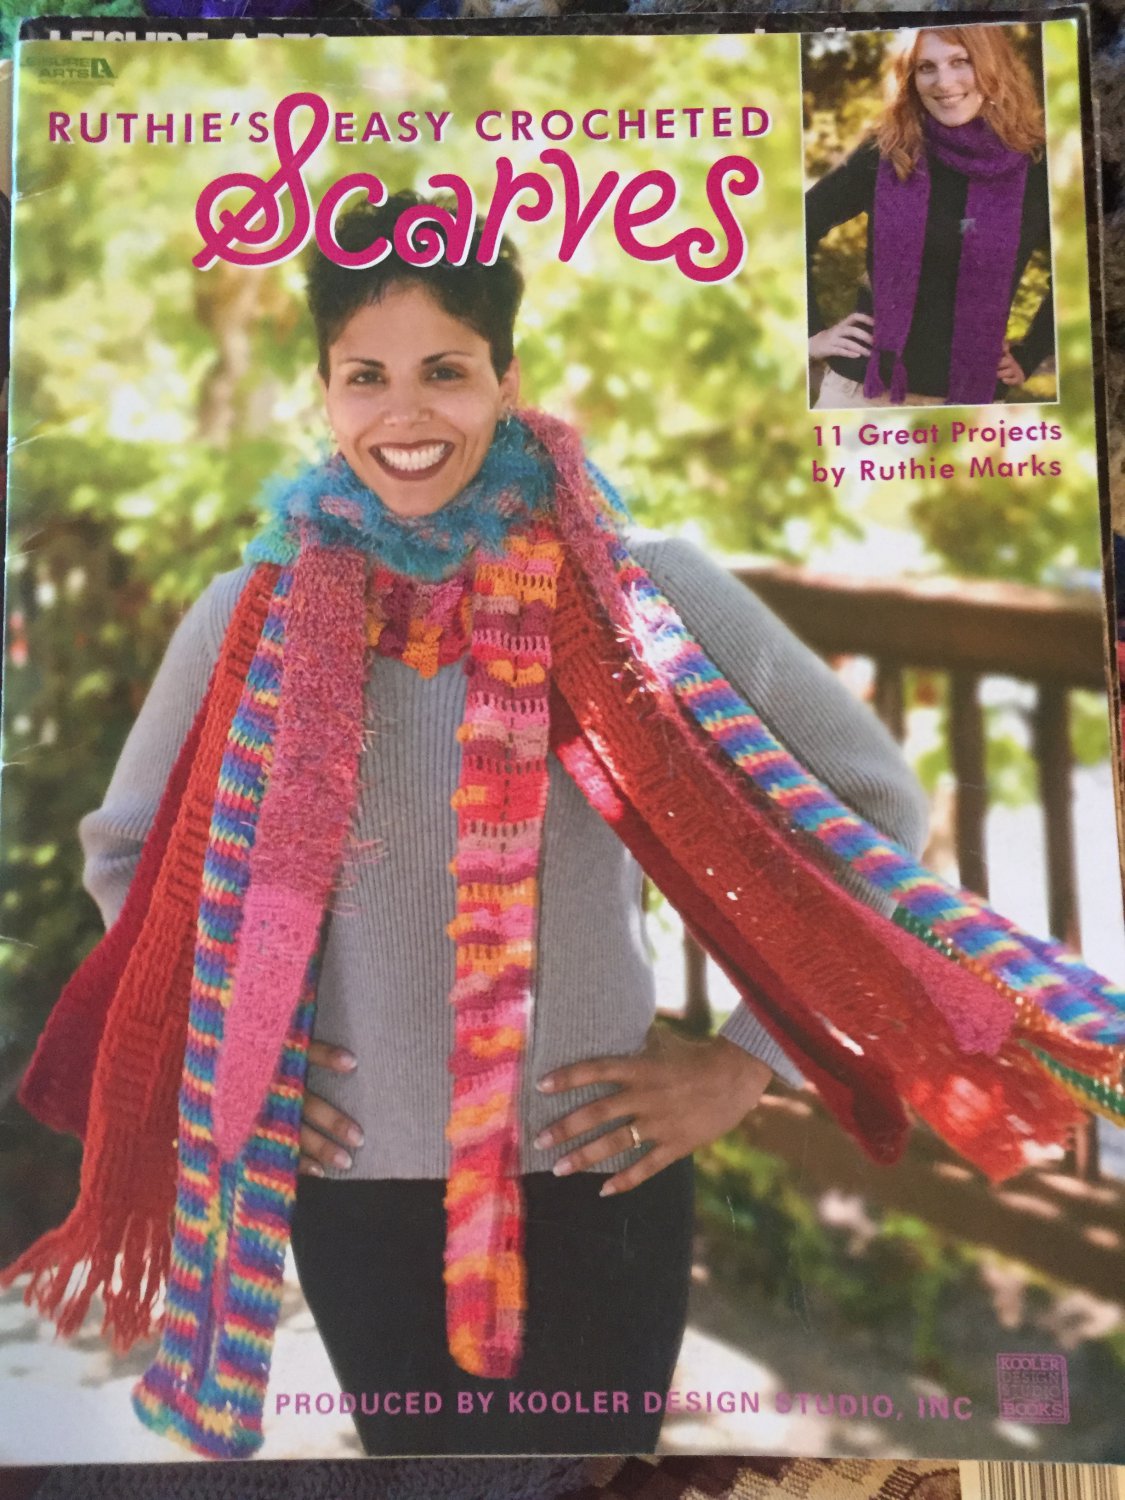 Ruthie's easy Crocheted Scarves Crochet Pattern Book from Leisure Arts 3669